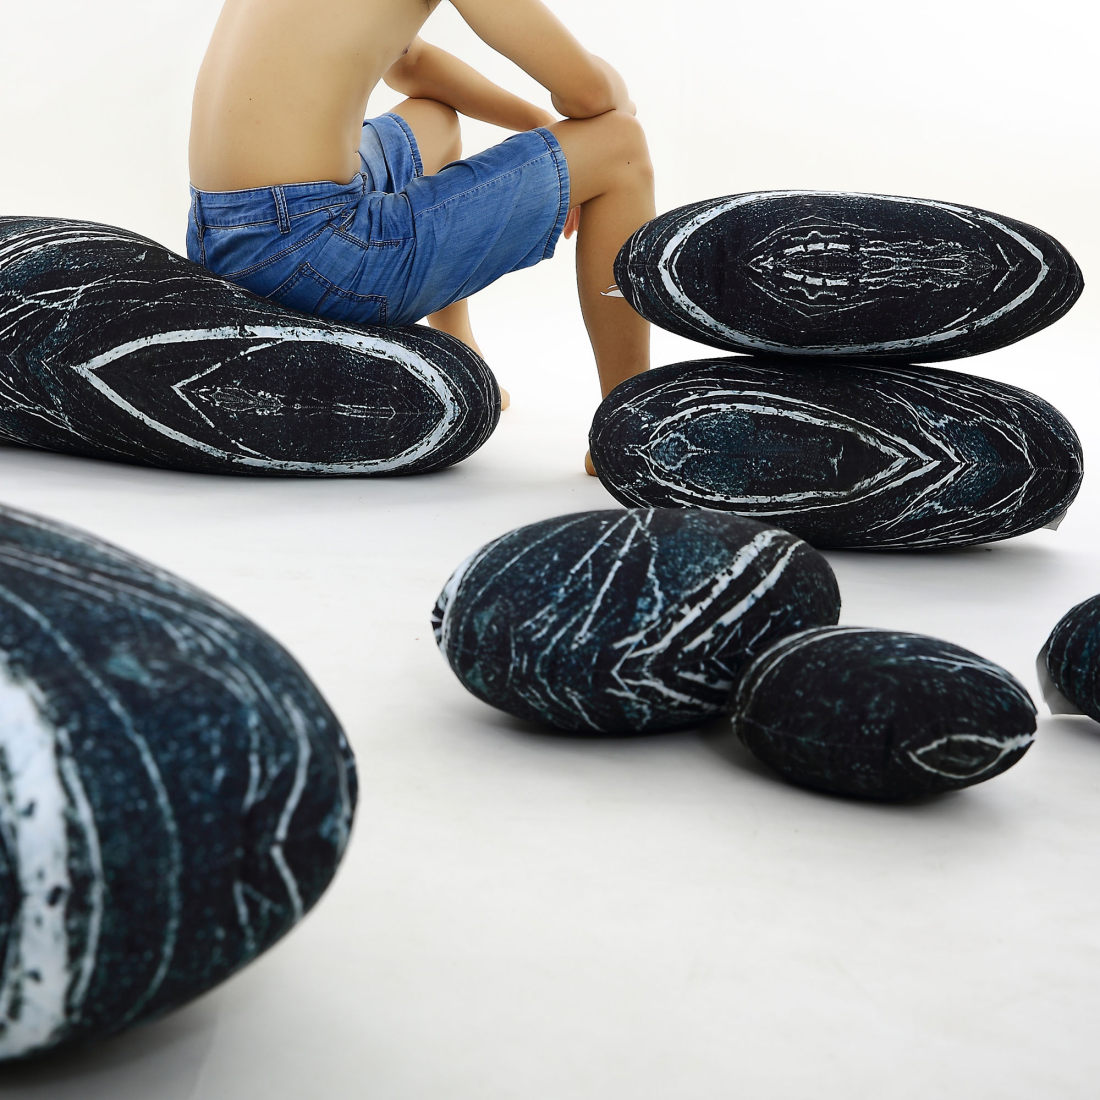 Decorative Pillows for Sofa and Play - Pebble Pillows